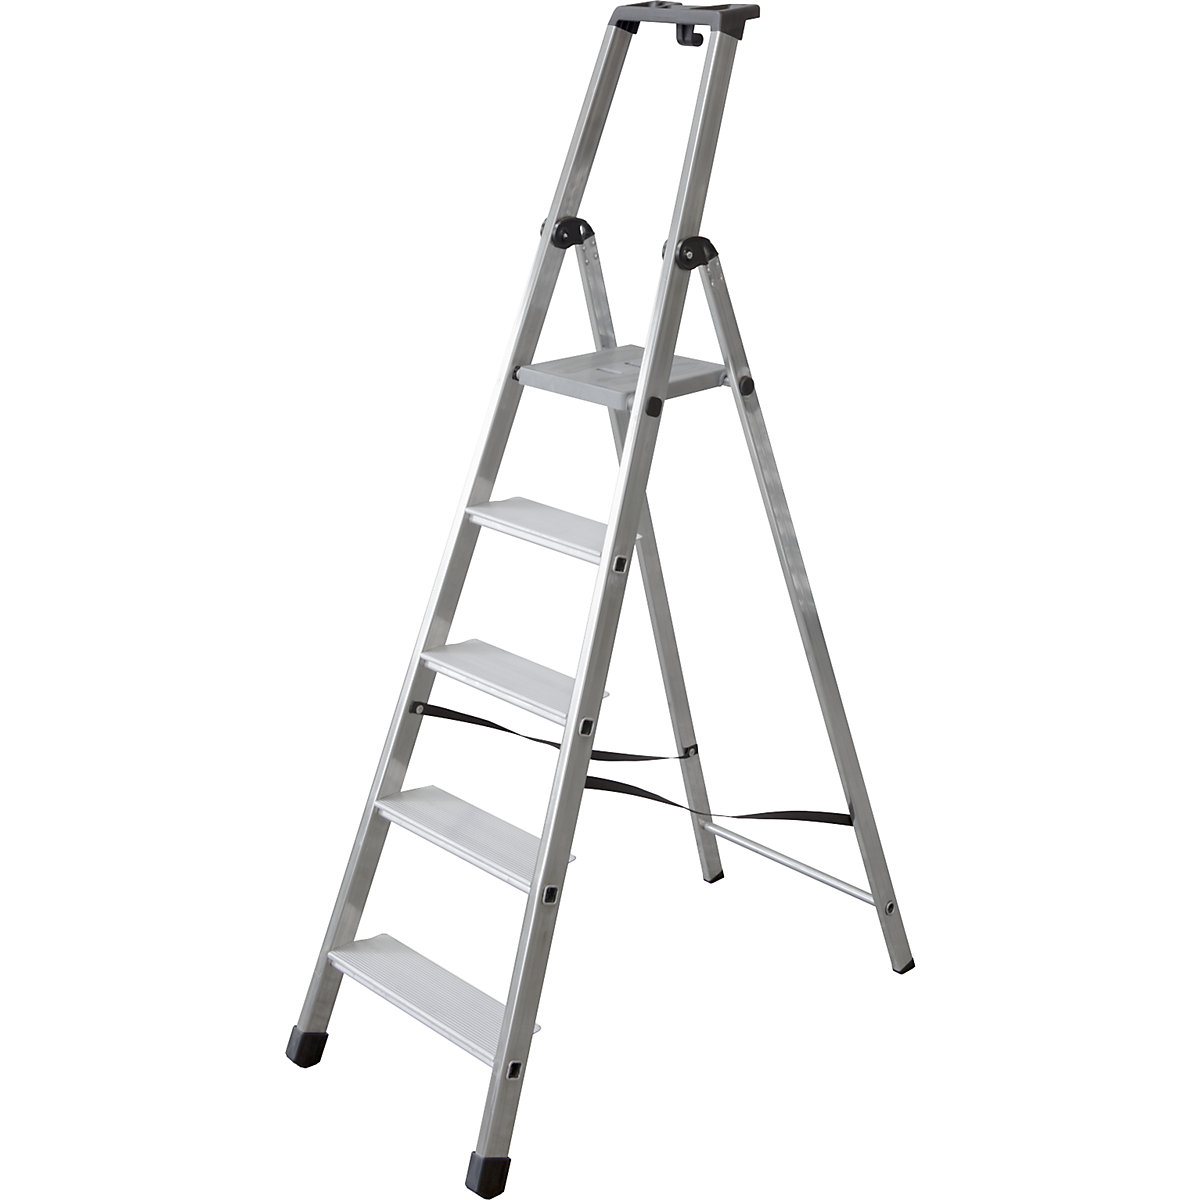 Step ladder, single sided access with extra deep steps, 5 steps incl. platform-1